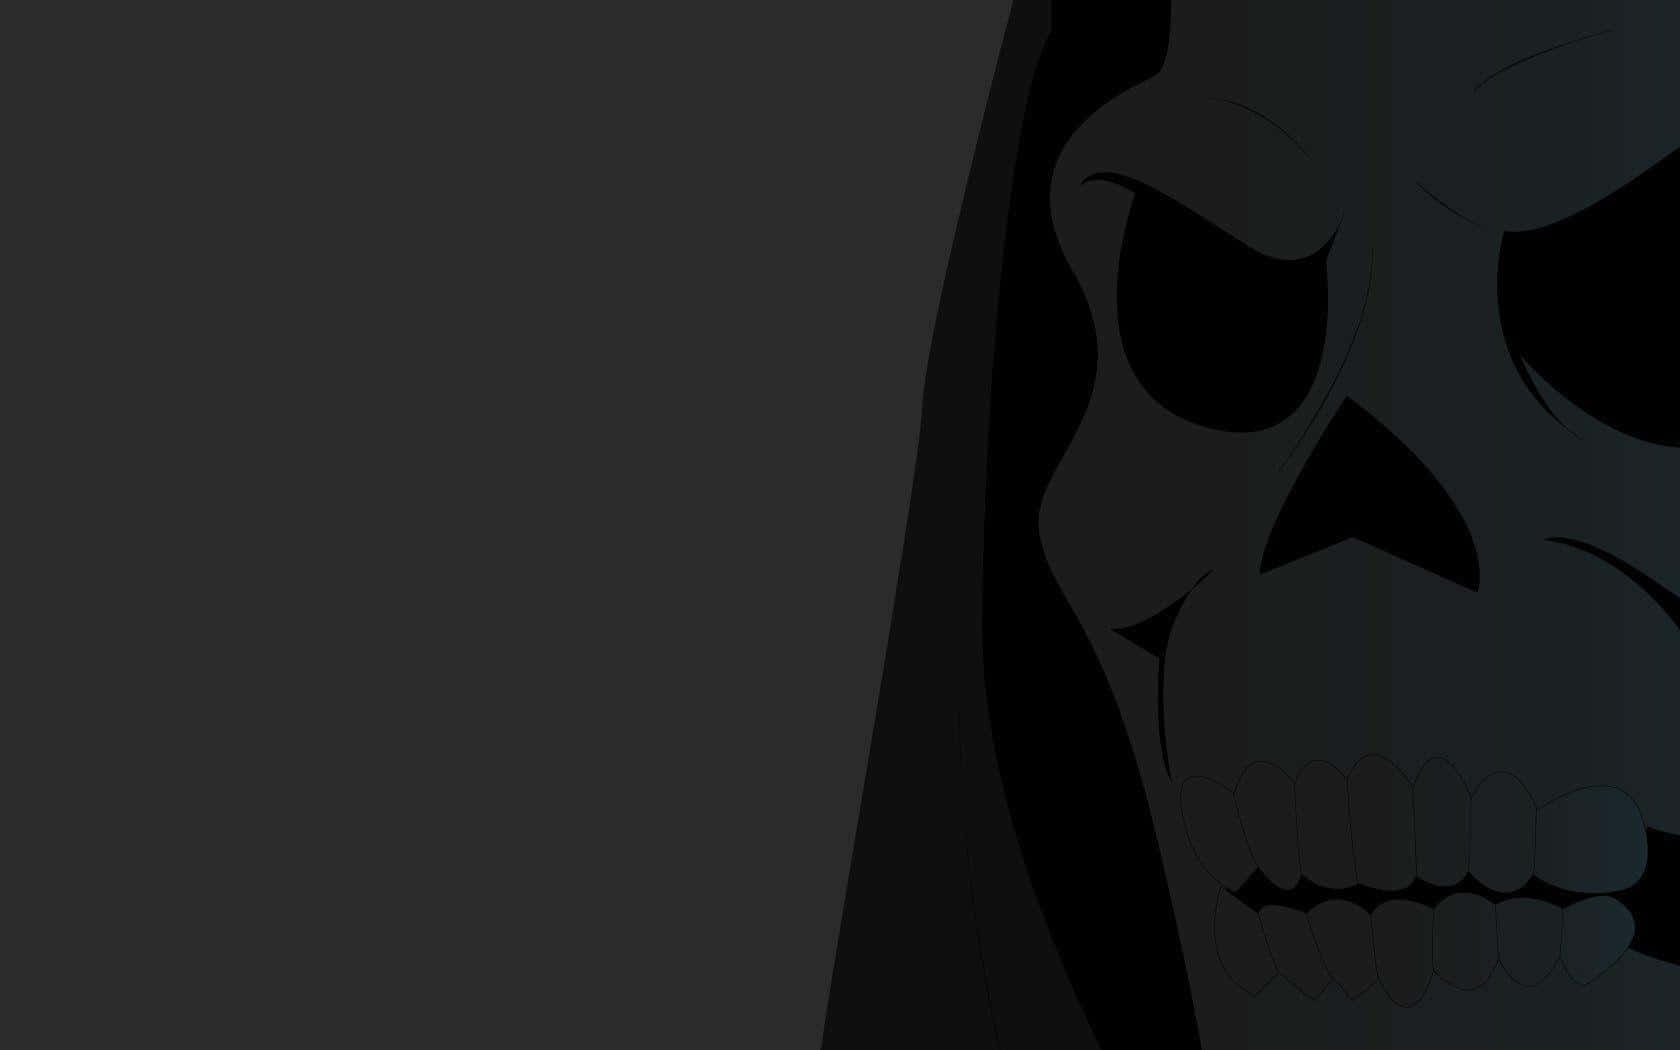 A Skull With A Hood Is Shown On A Black Background